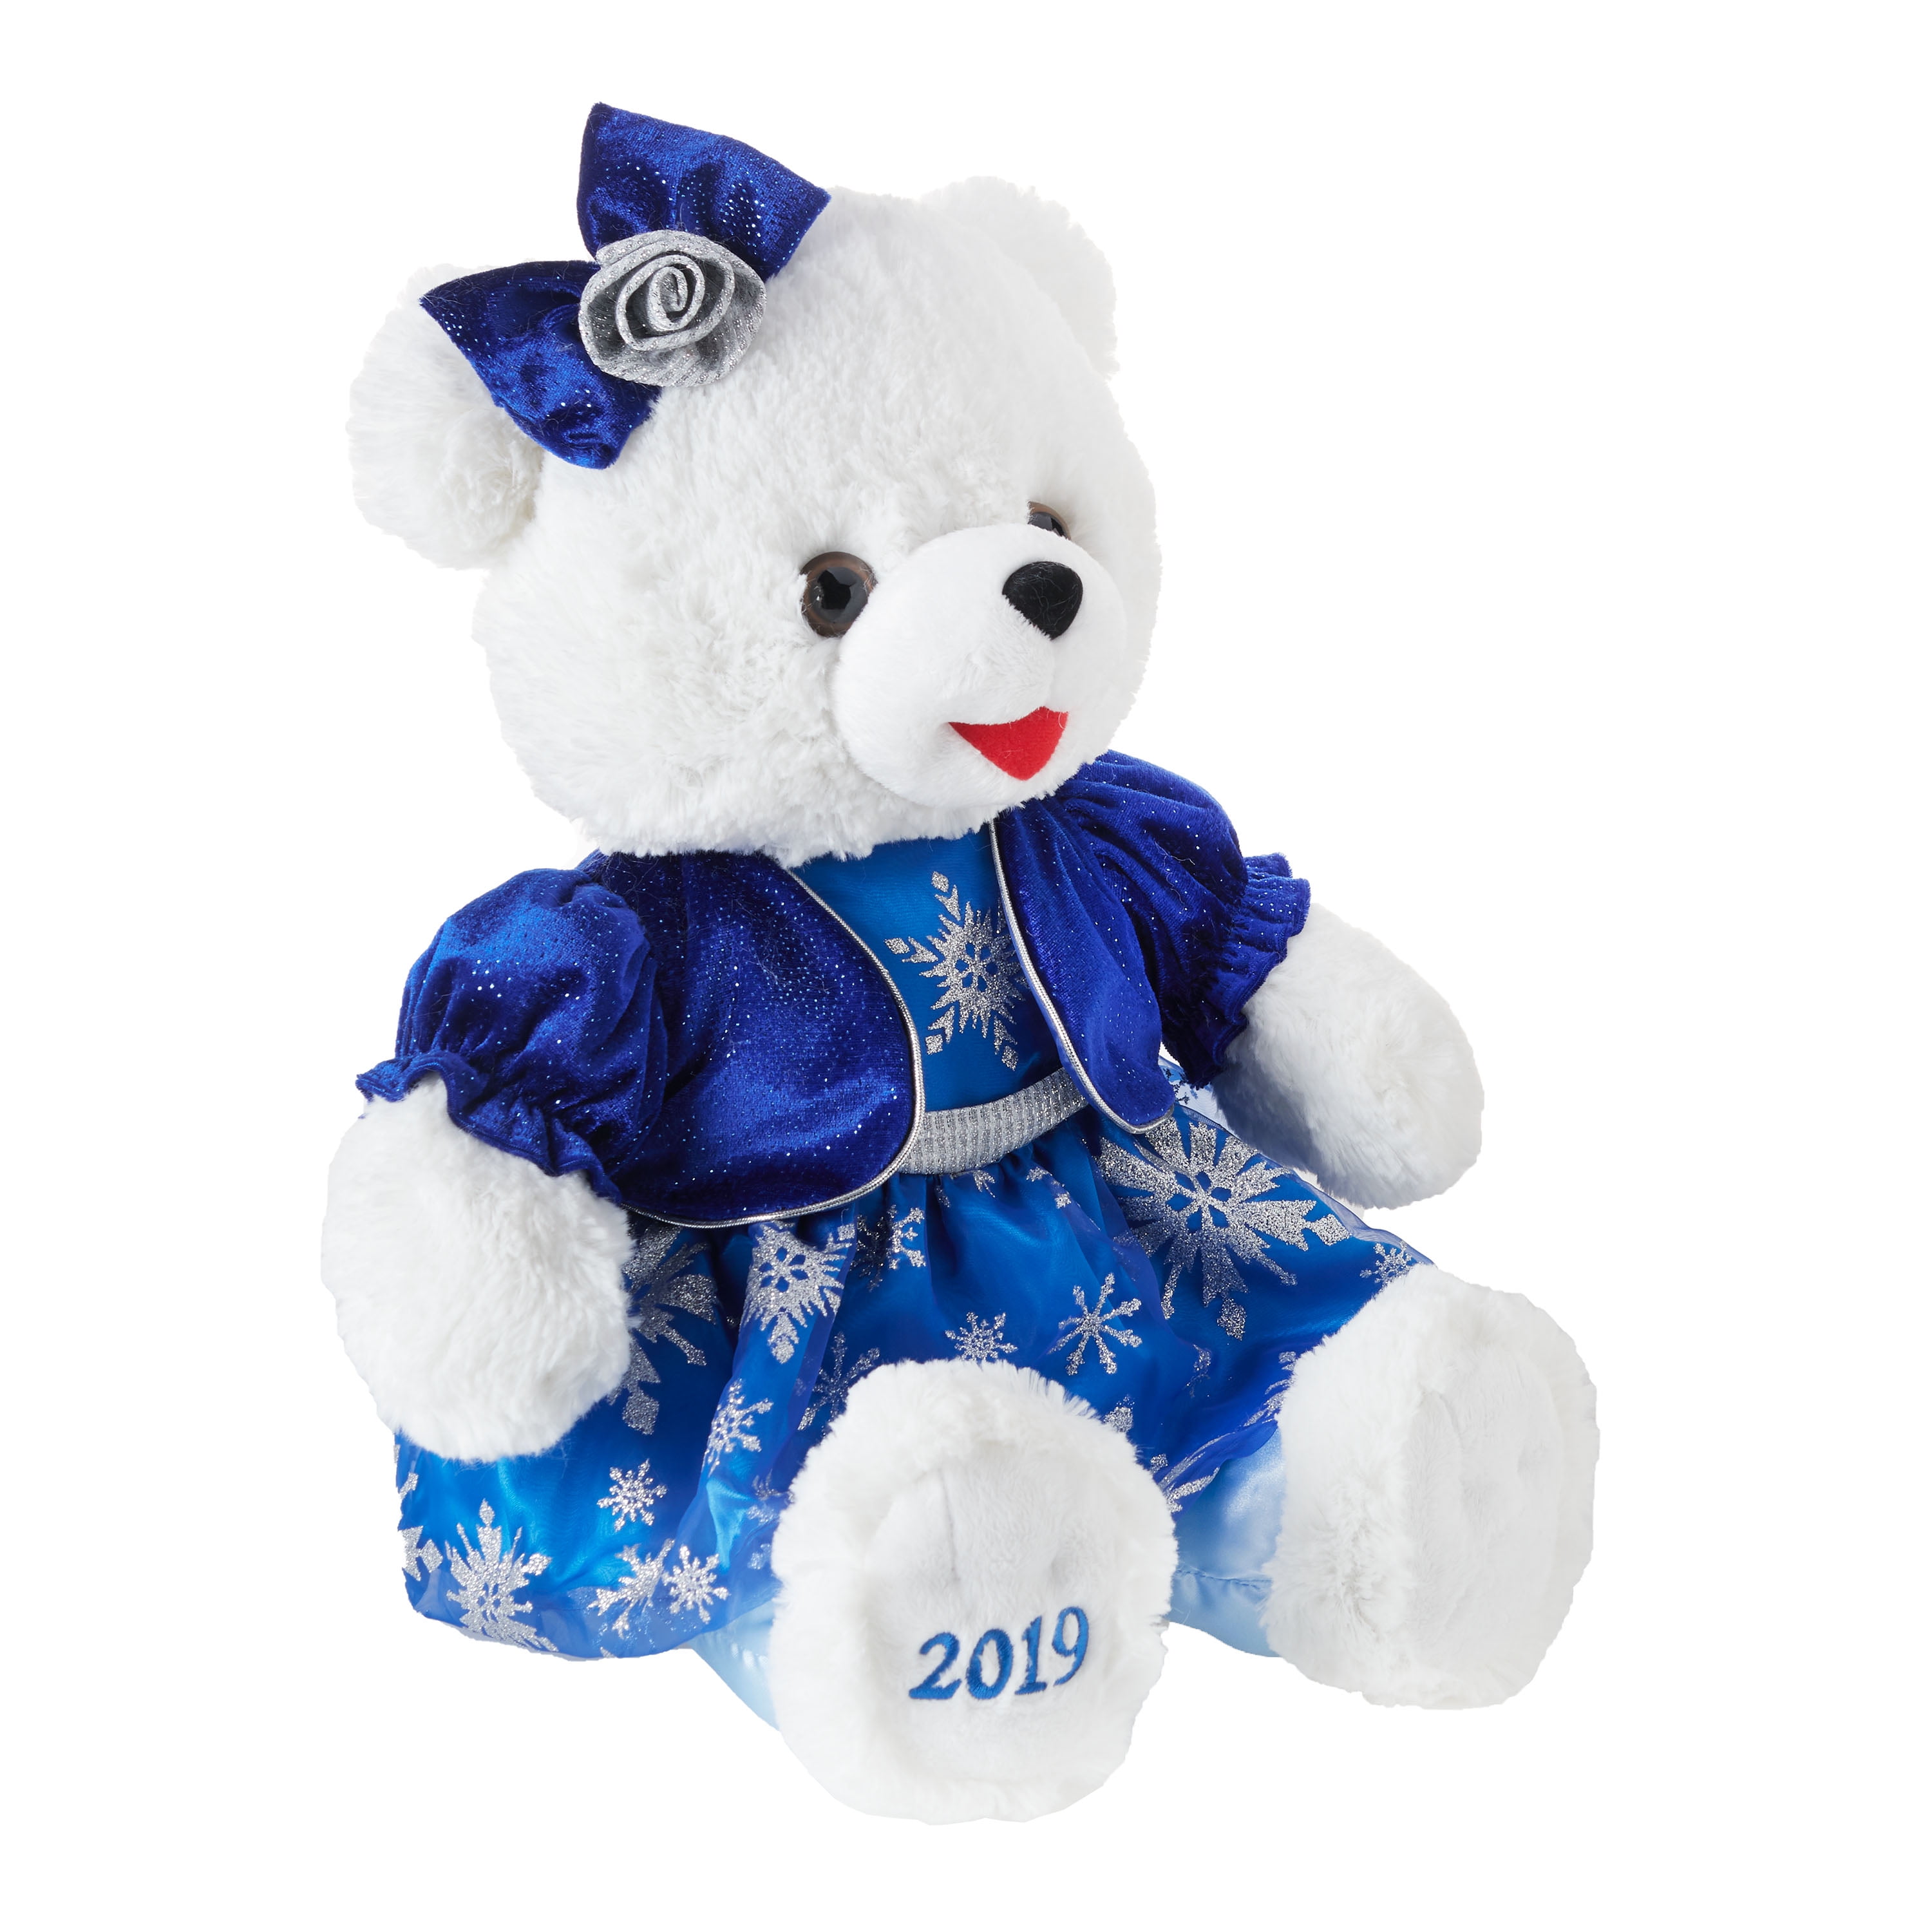 2020 Christmas White with Blue Girl Plush Stuffed Teddy Bear by Holiday Time 